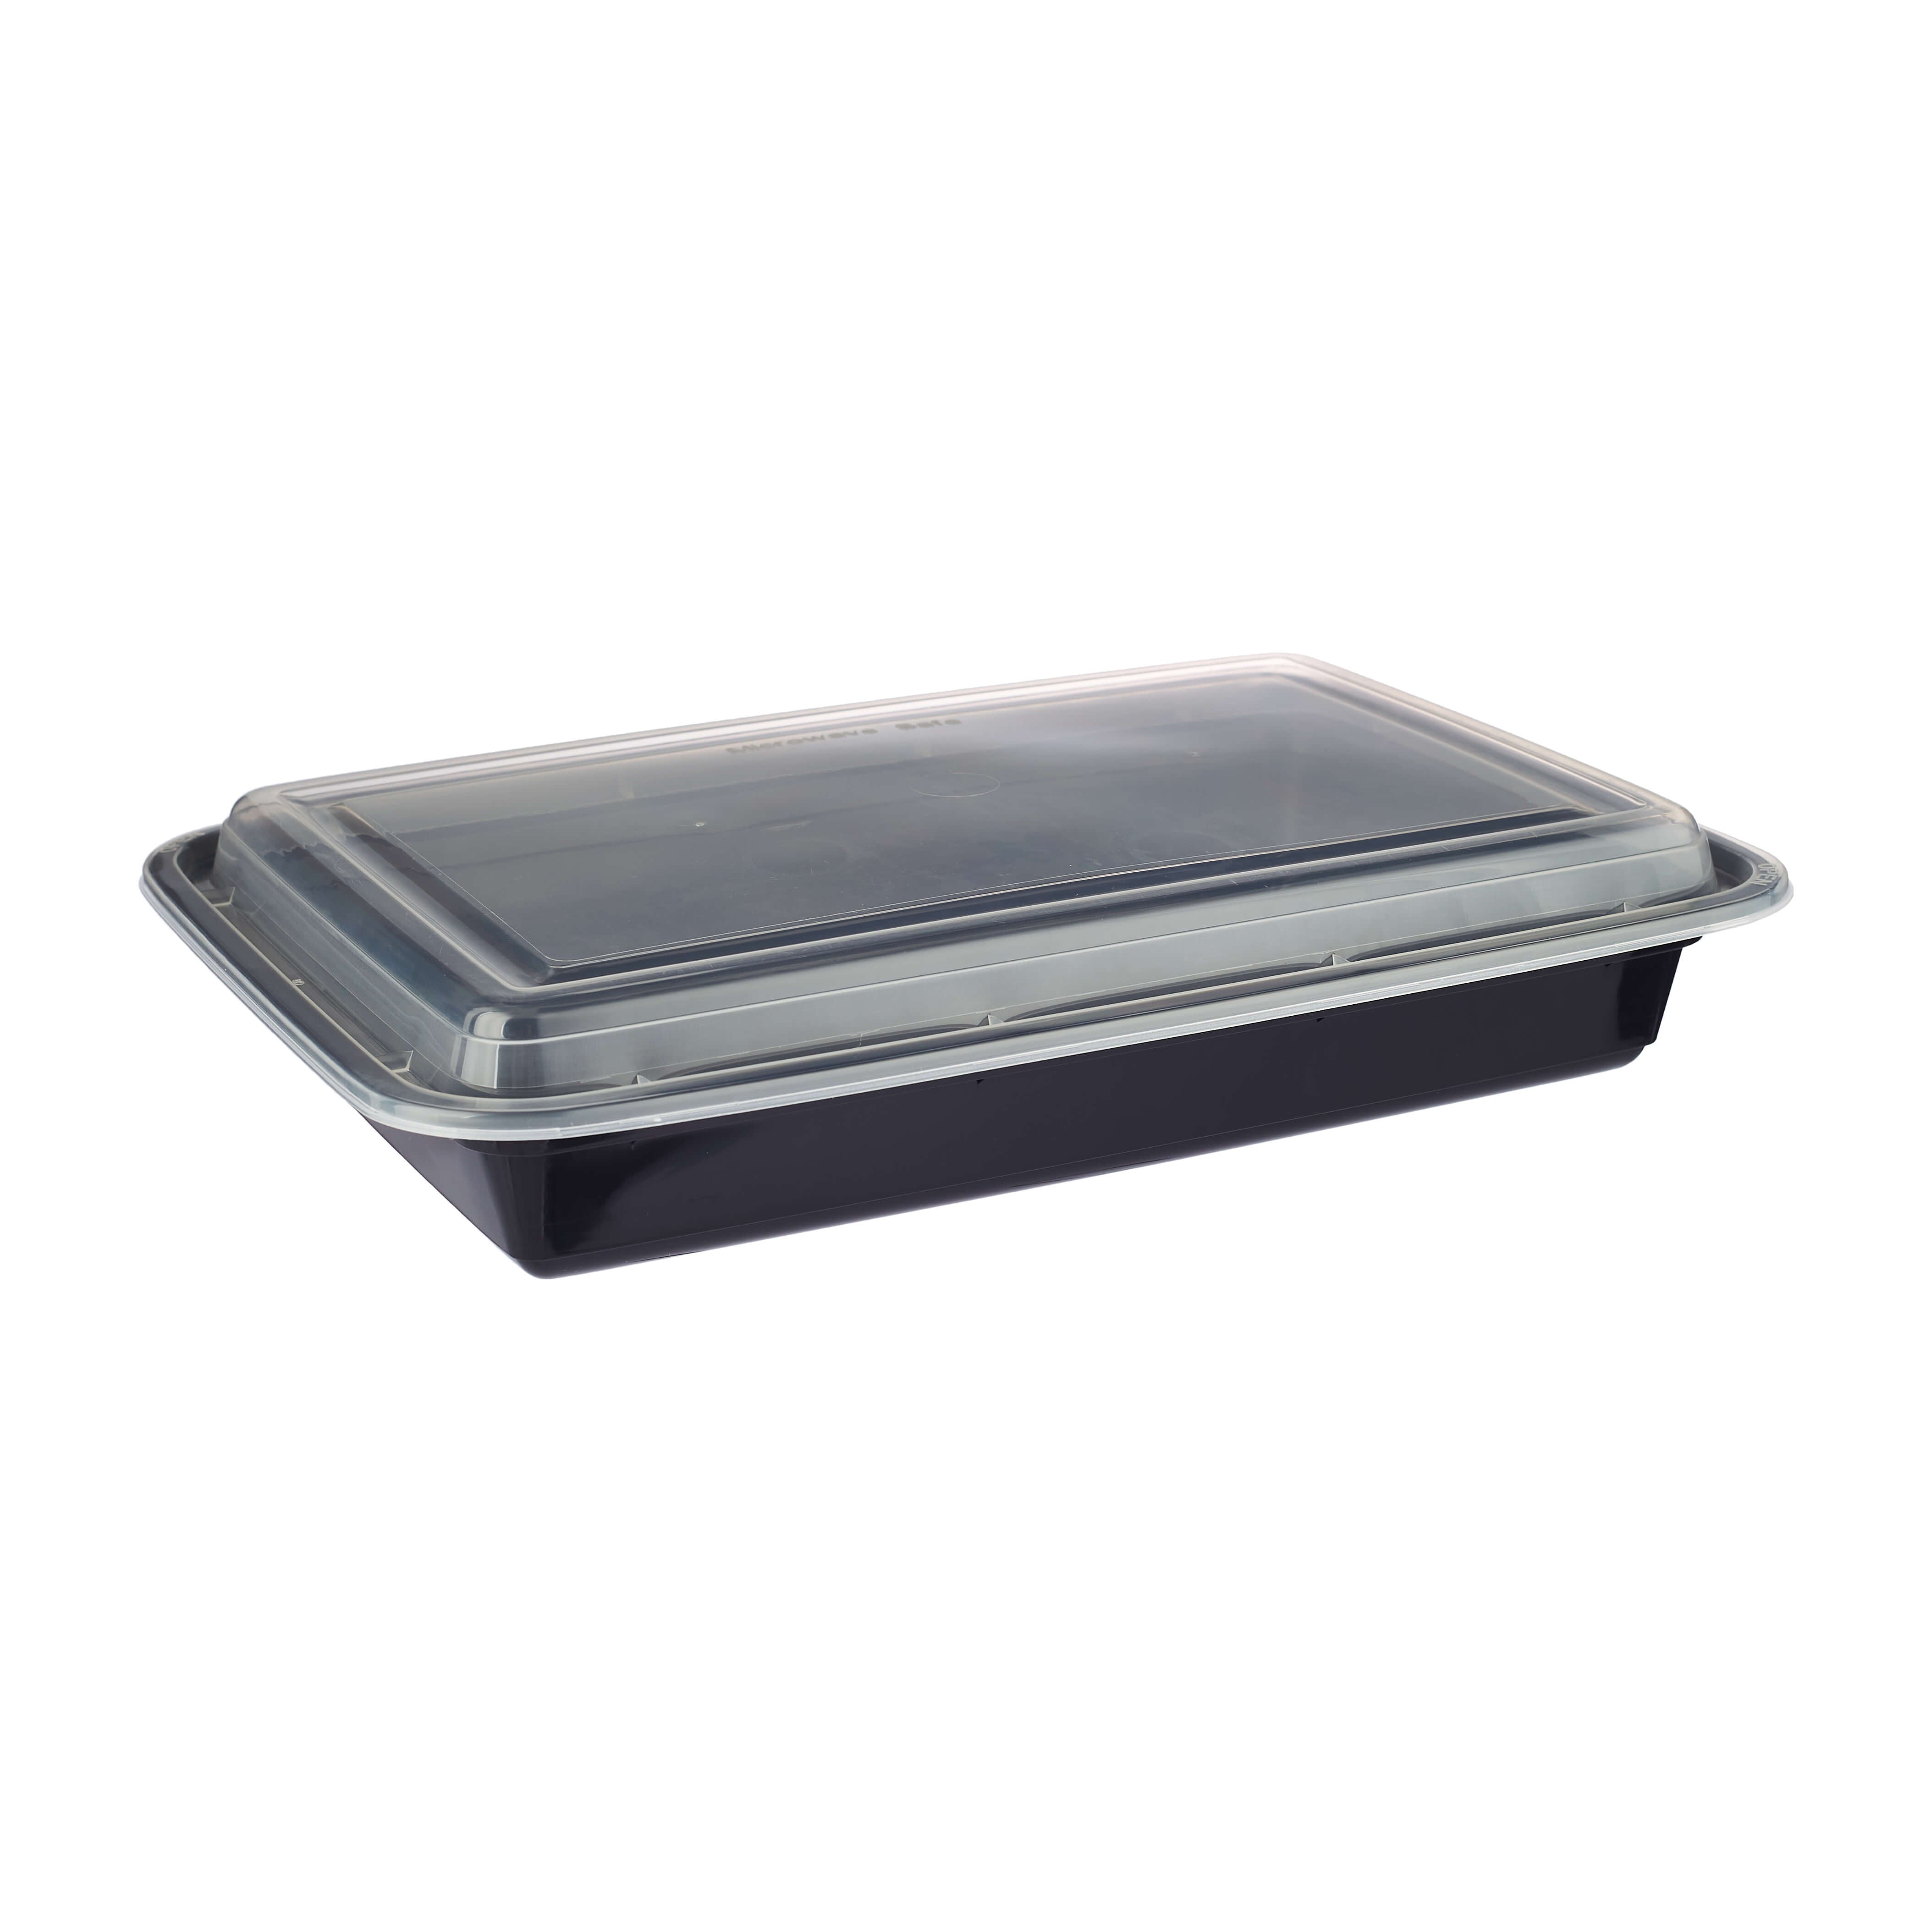 58 Oz Black Base Rectangular Container with Lid - Hotpack Global